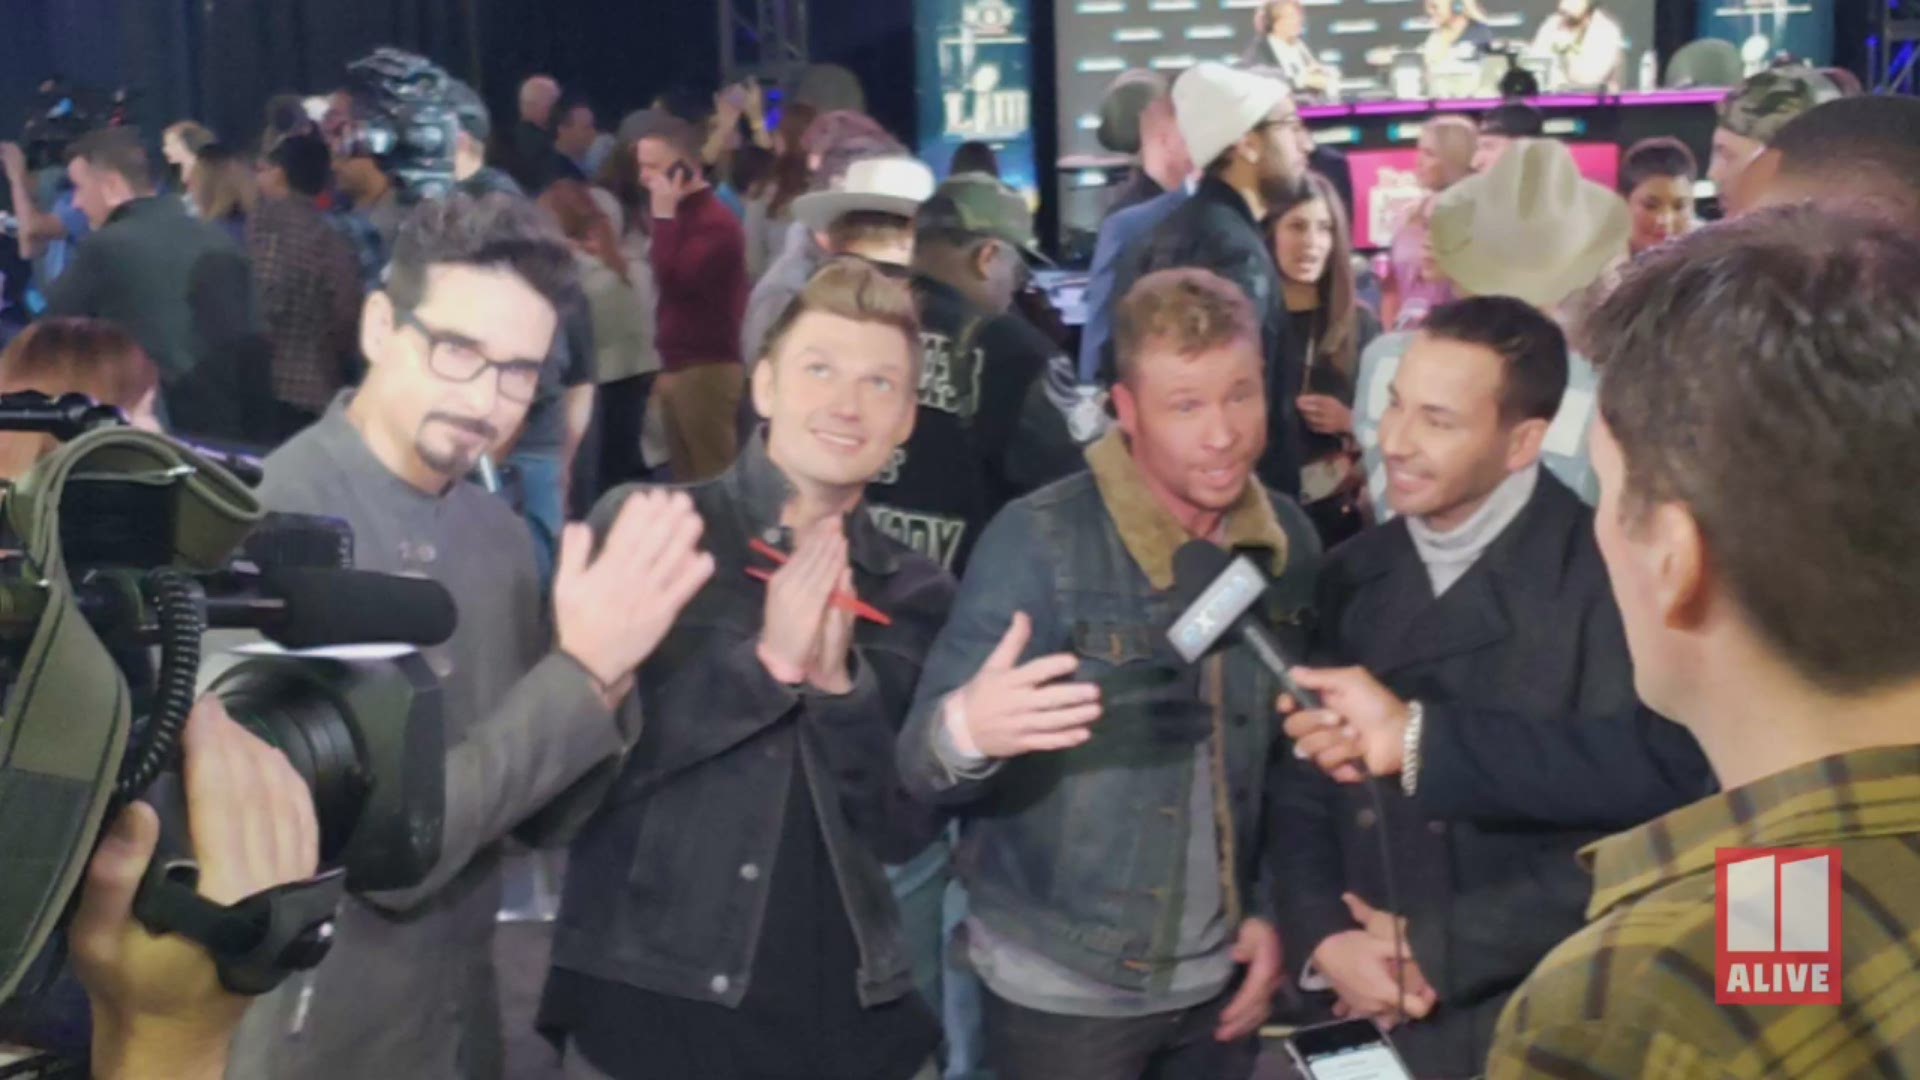 From the Backstreet Boys to Kevin Hard and the Osteens, so many celebrities are being spotted on Radio Row.